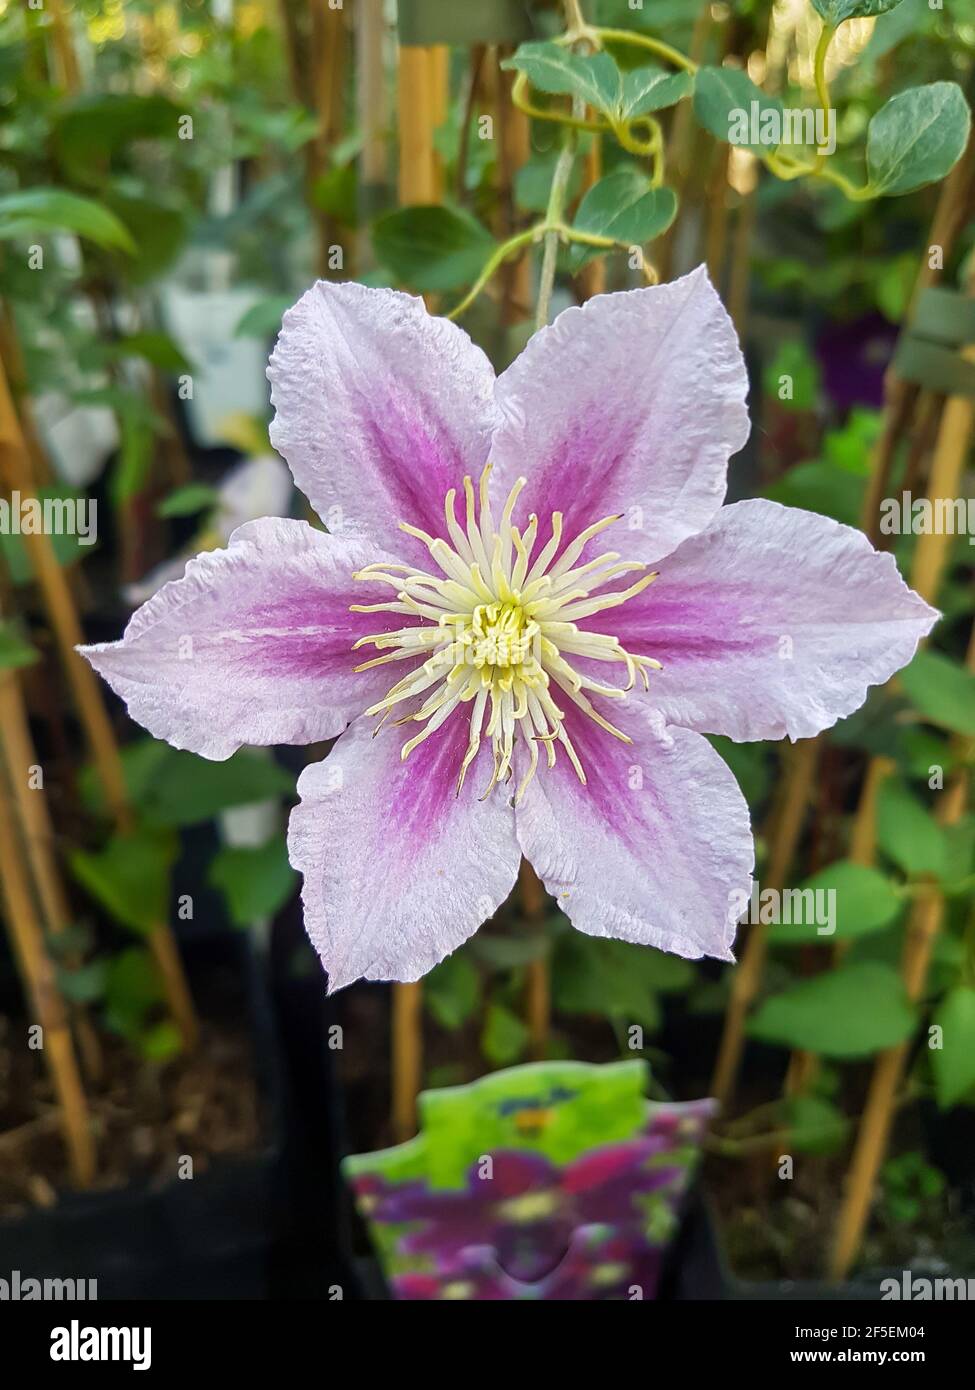 Beautiful clematis flower in the greenhouse close-up Coriflora or Atragene plants background Stock Photo